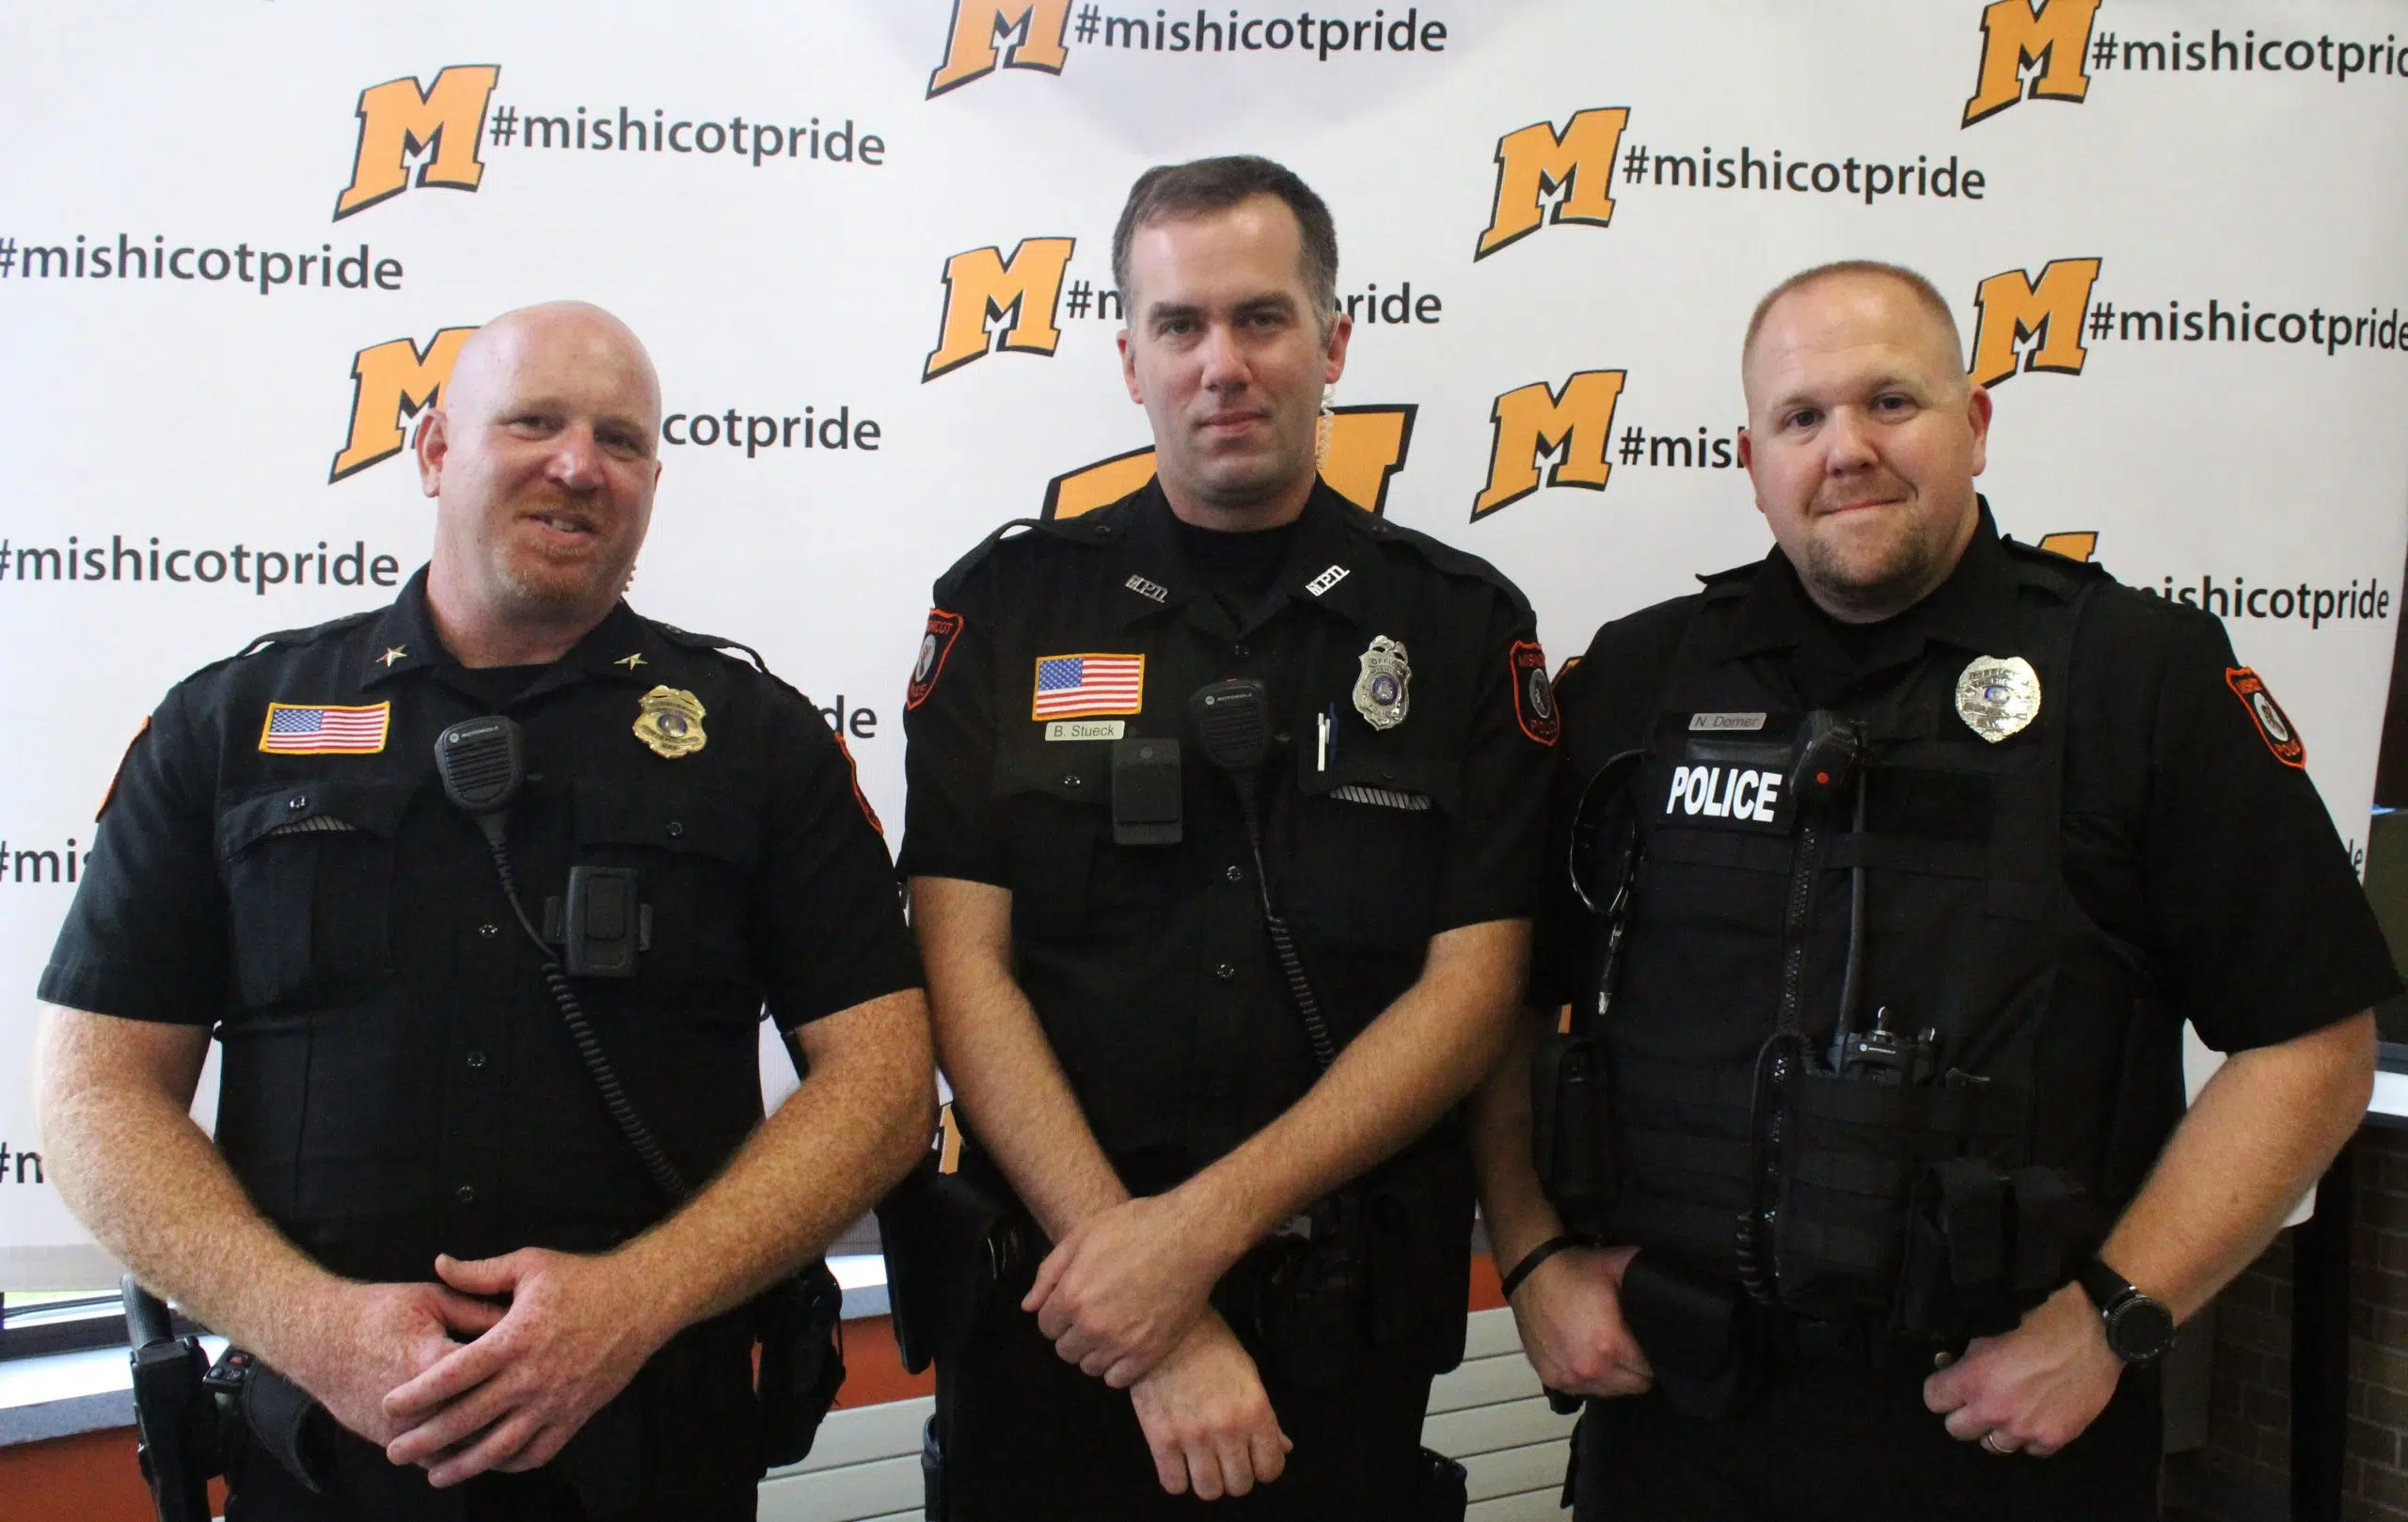 School District of Mishicot Team up With Village to Provide Student Resource Officer 